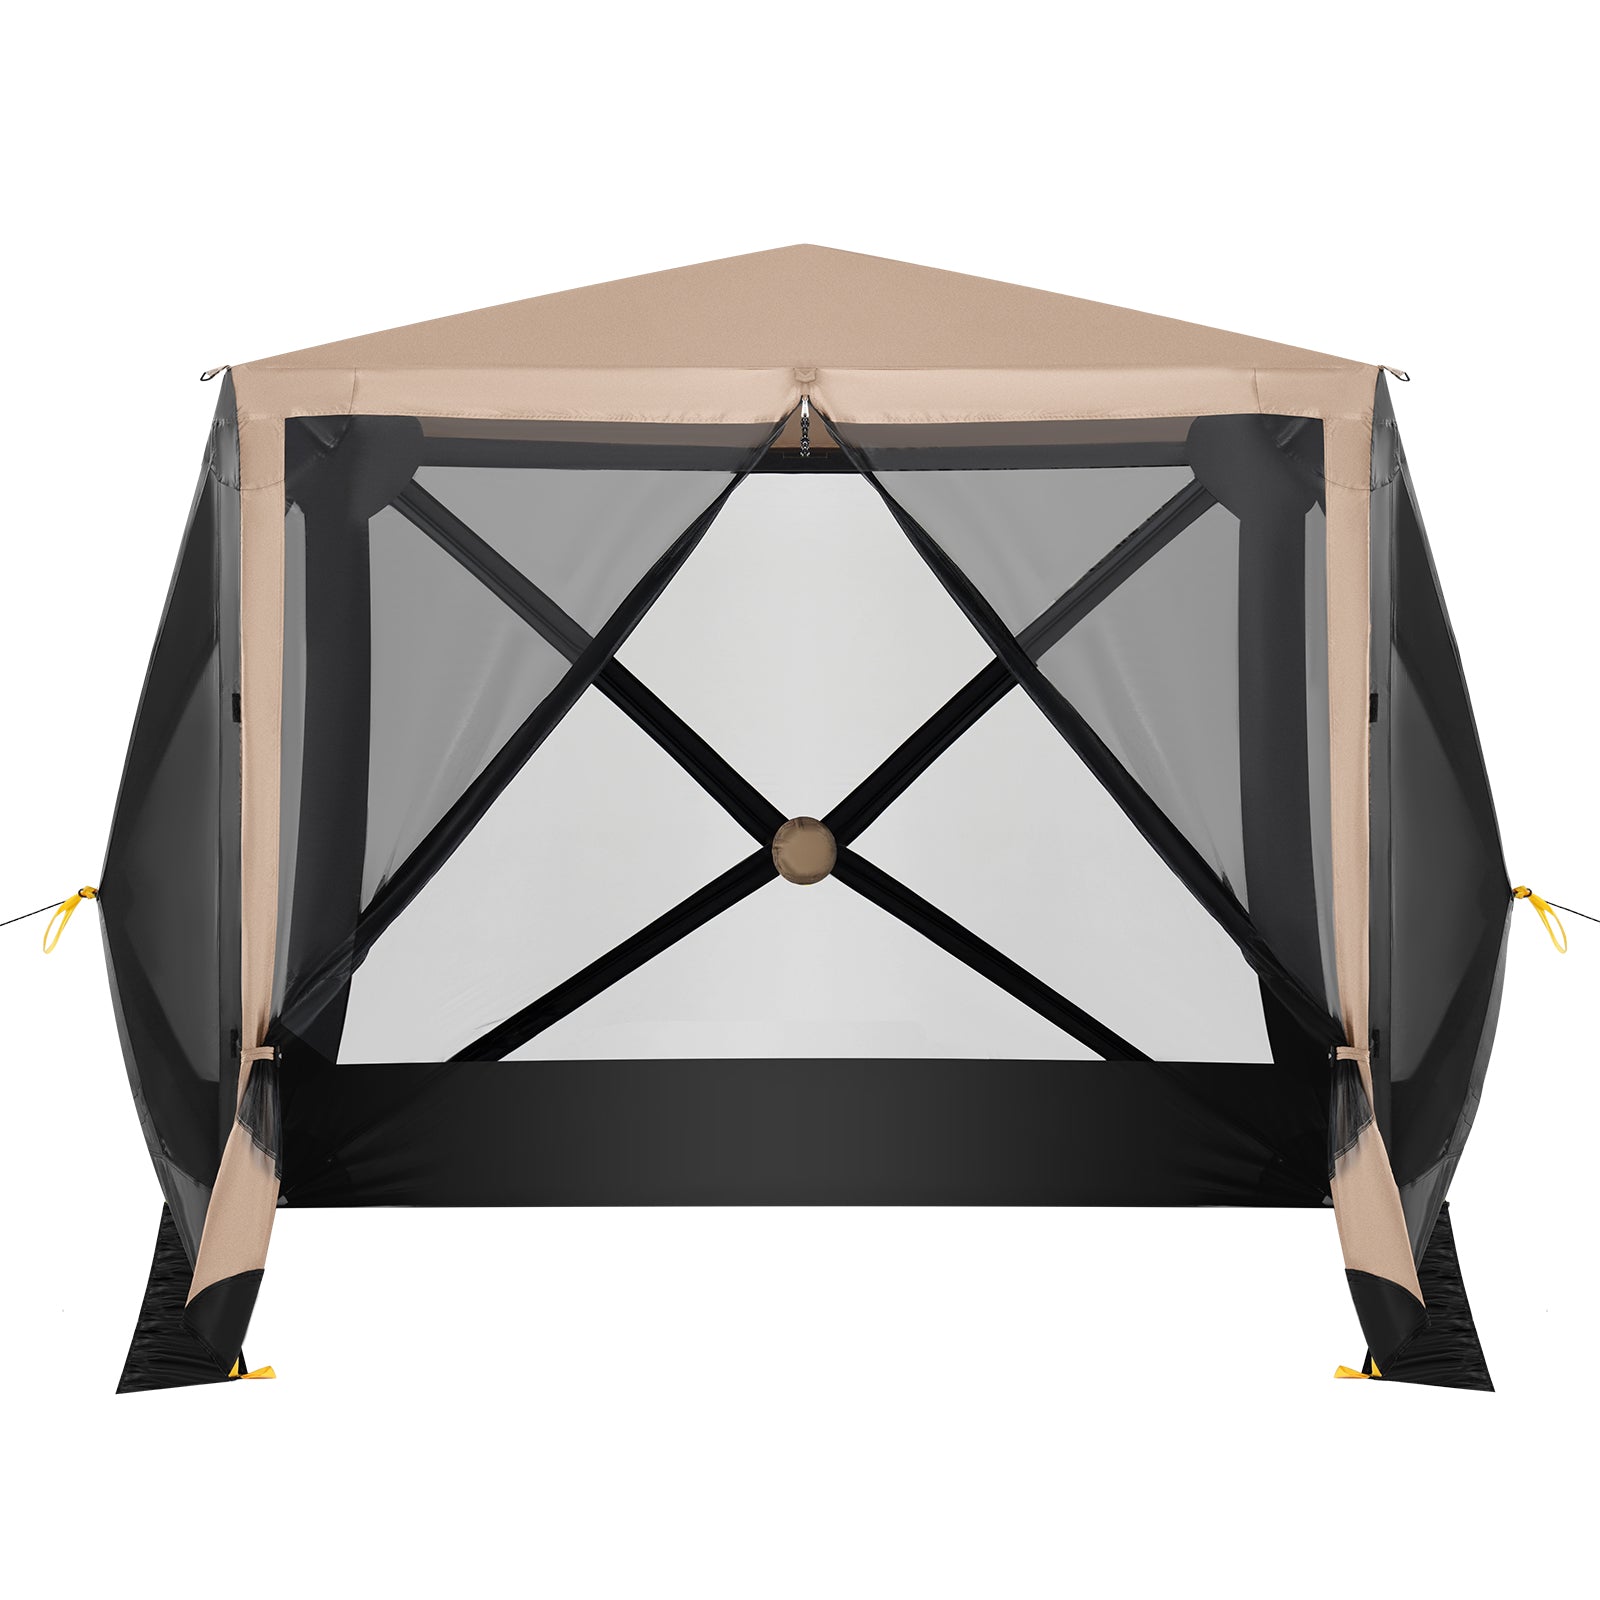 Zeta D4 Pro Max Camping Canopy Gazebo Tent, 4 Person Pop-up Screen Tent for Camping 4 Sided Shelter Tent with 1 Wind Panel & Carrying Bag Easy Set up in 60 Seconds